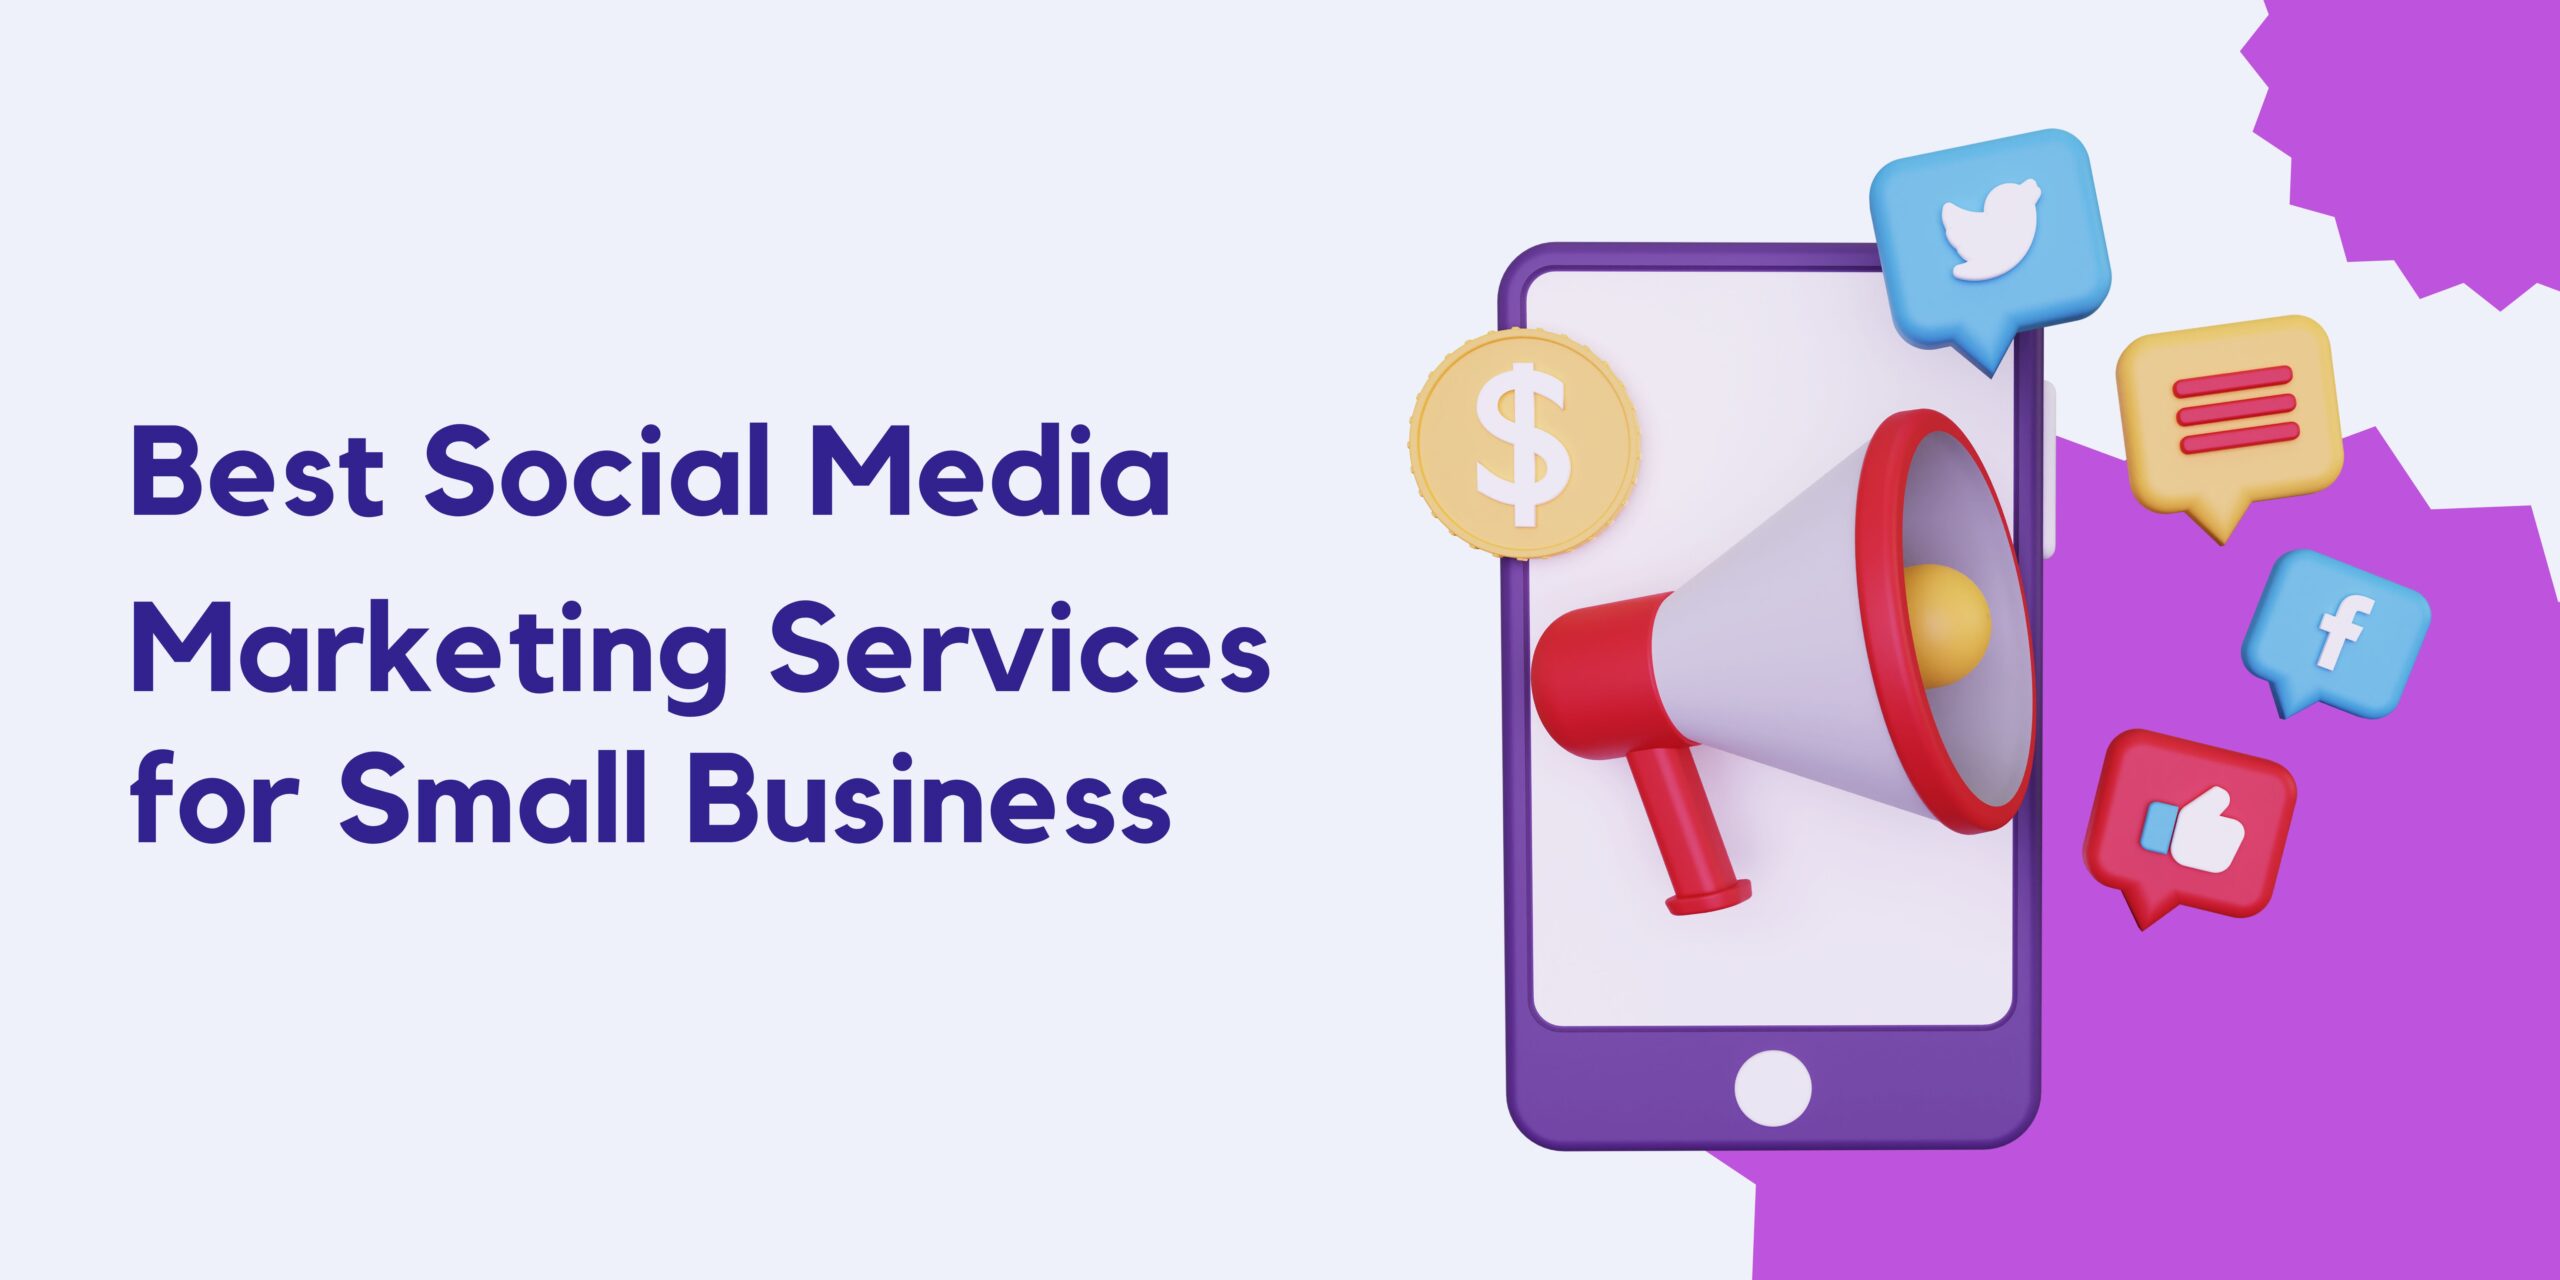 Best Social Media Marketing Services for Small Business